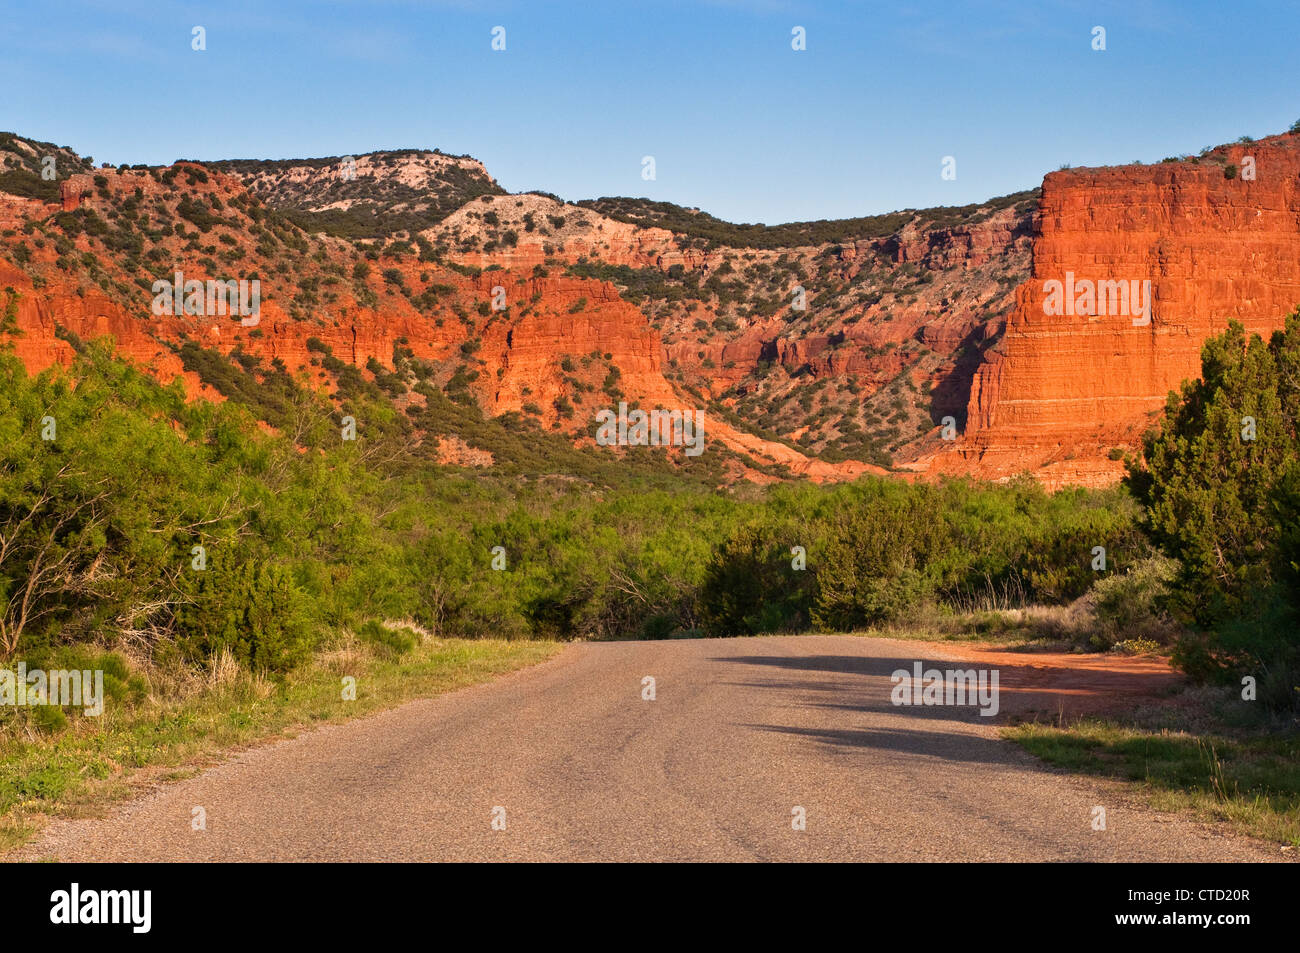 Haynes Ridge eroded buttes and cliffs seen from road in Caprock Canyons State Park, Texas, USA Stock Photo